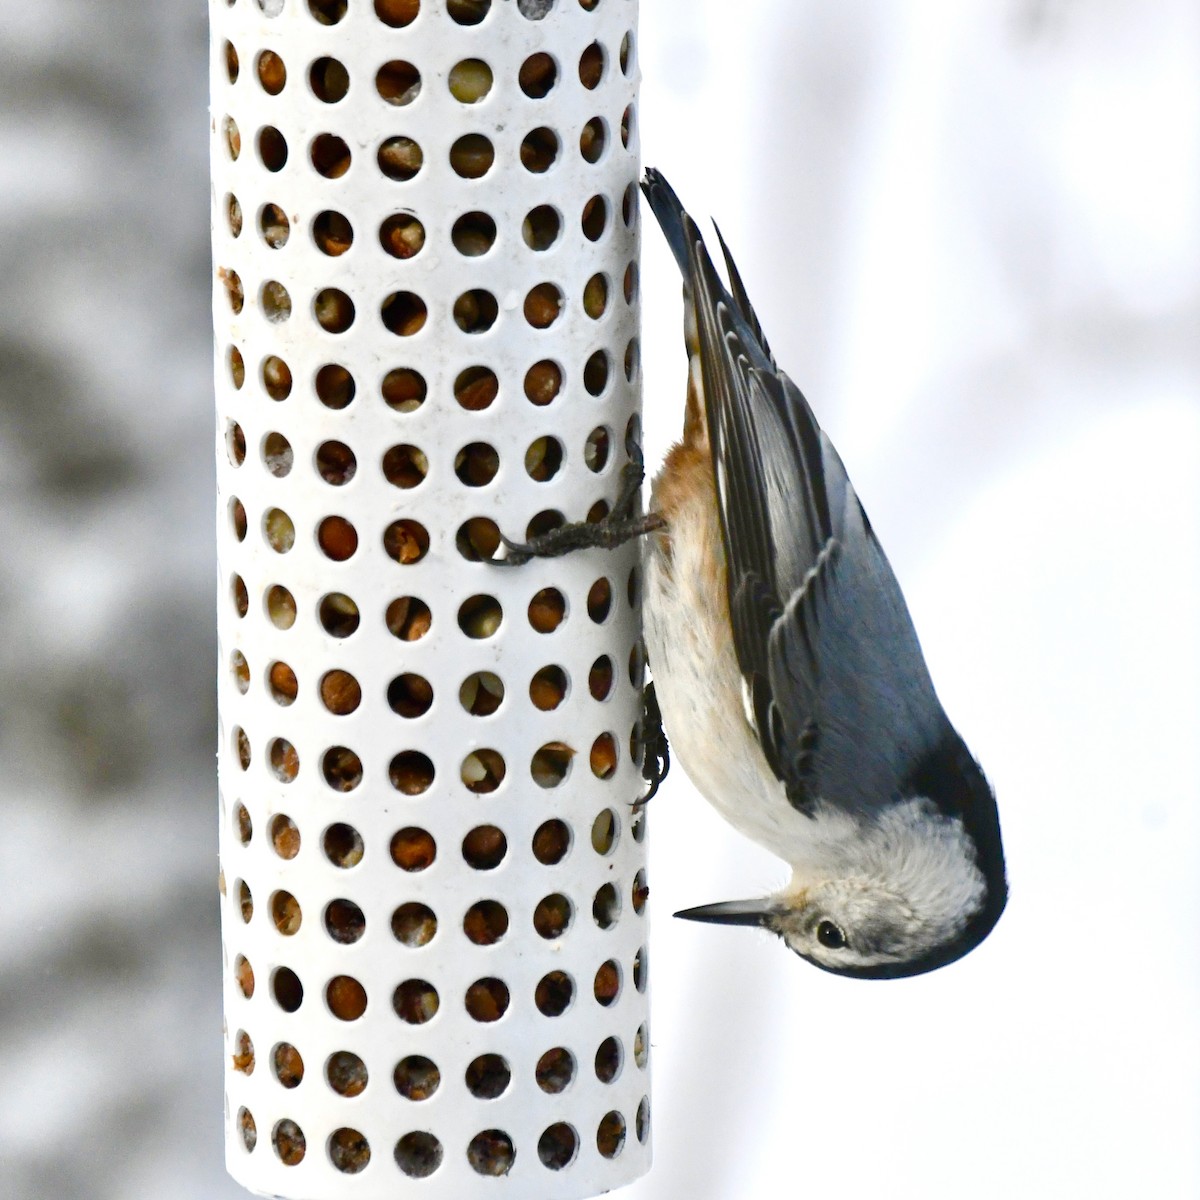 White-breasted Nuthatch - Michael Hatton